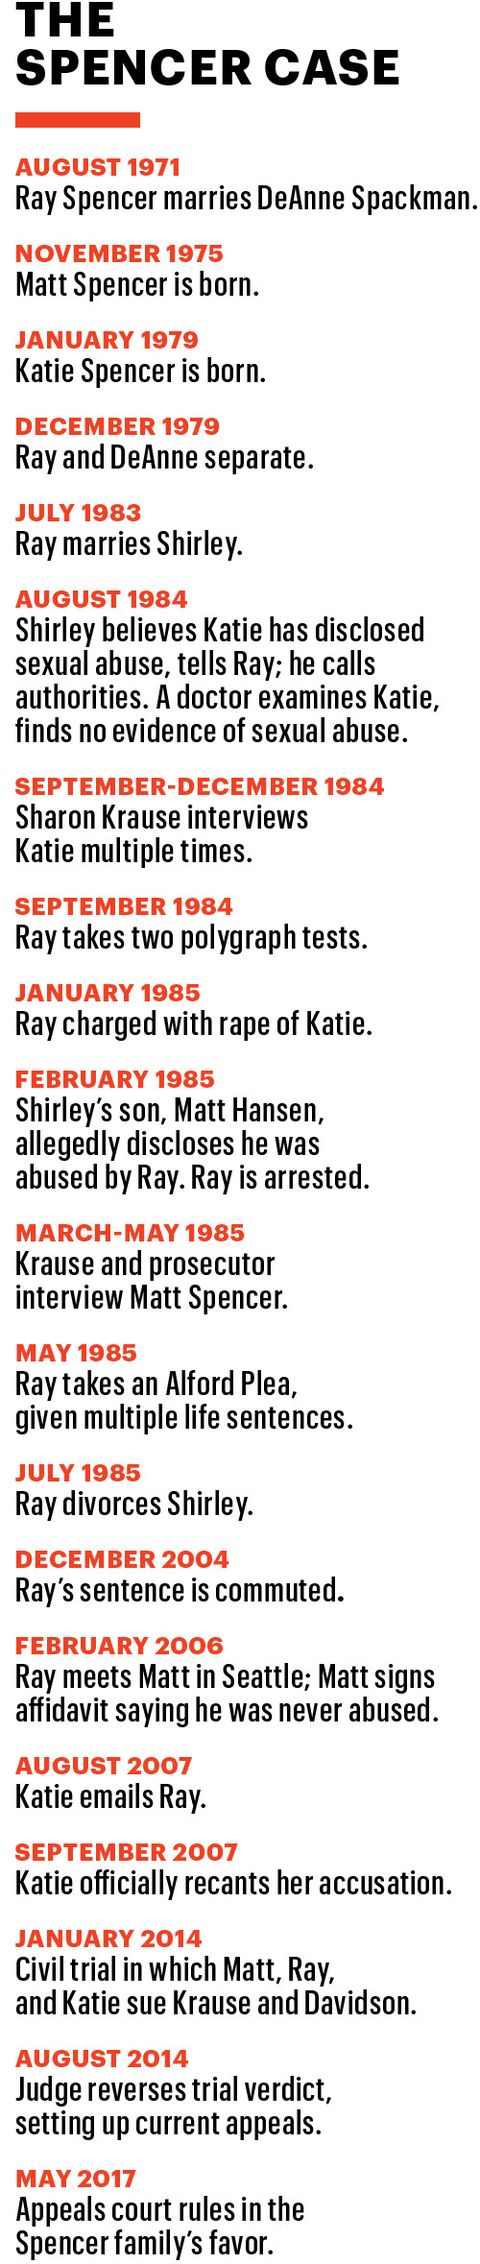 August 1971: Ray Spencer marries DeAnne Spackman.November 1975: Matt Spencer born.January 1979: Katie Spencer born.December 1979: Ray and DeAnne separate.July 1983: Ray marries Shirley.August 1984: Shirley believes Katie has disclosed sexual abuse, tells Ray; he calls authorities. A doctor examines Katie, finds no evidence of sexual abuse.September-December 1984: Sharon Krause interviews Katie multiple times.September 1984: Ray takes two polygraph tests.January 1985:  Ray charged with rape of Katie.February 1985: Shirley's son, Matt Hansen, allegedly discloses he was abused by Ray. Ray is arrested.March-May 1985: Krause and prosecutor interview Matt Spencer.May 1985: Ray takes an Alford Plea, given multiple life sentences.July 1985: Ray officially divorces Shirley.December 2004: Ray's sentence is commuted.February 2006: Ray meets Matt in Seattle; Matt signs affidavit saying he was never abused.August 2007: Katie emails Ray.September 2007: Katie officially recants her accusation.January 2014: Civil trial in which Matt, Ray, and Katie sue Krause and Davidson.August 2014: Judge reverses trial verdict, setting up current appeals.May 2017: Appeals court rules in the Spencer family's favor.